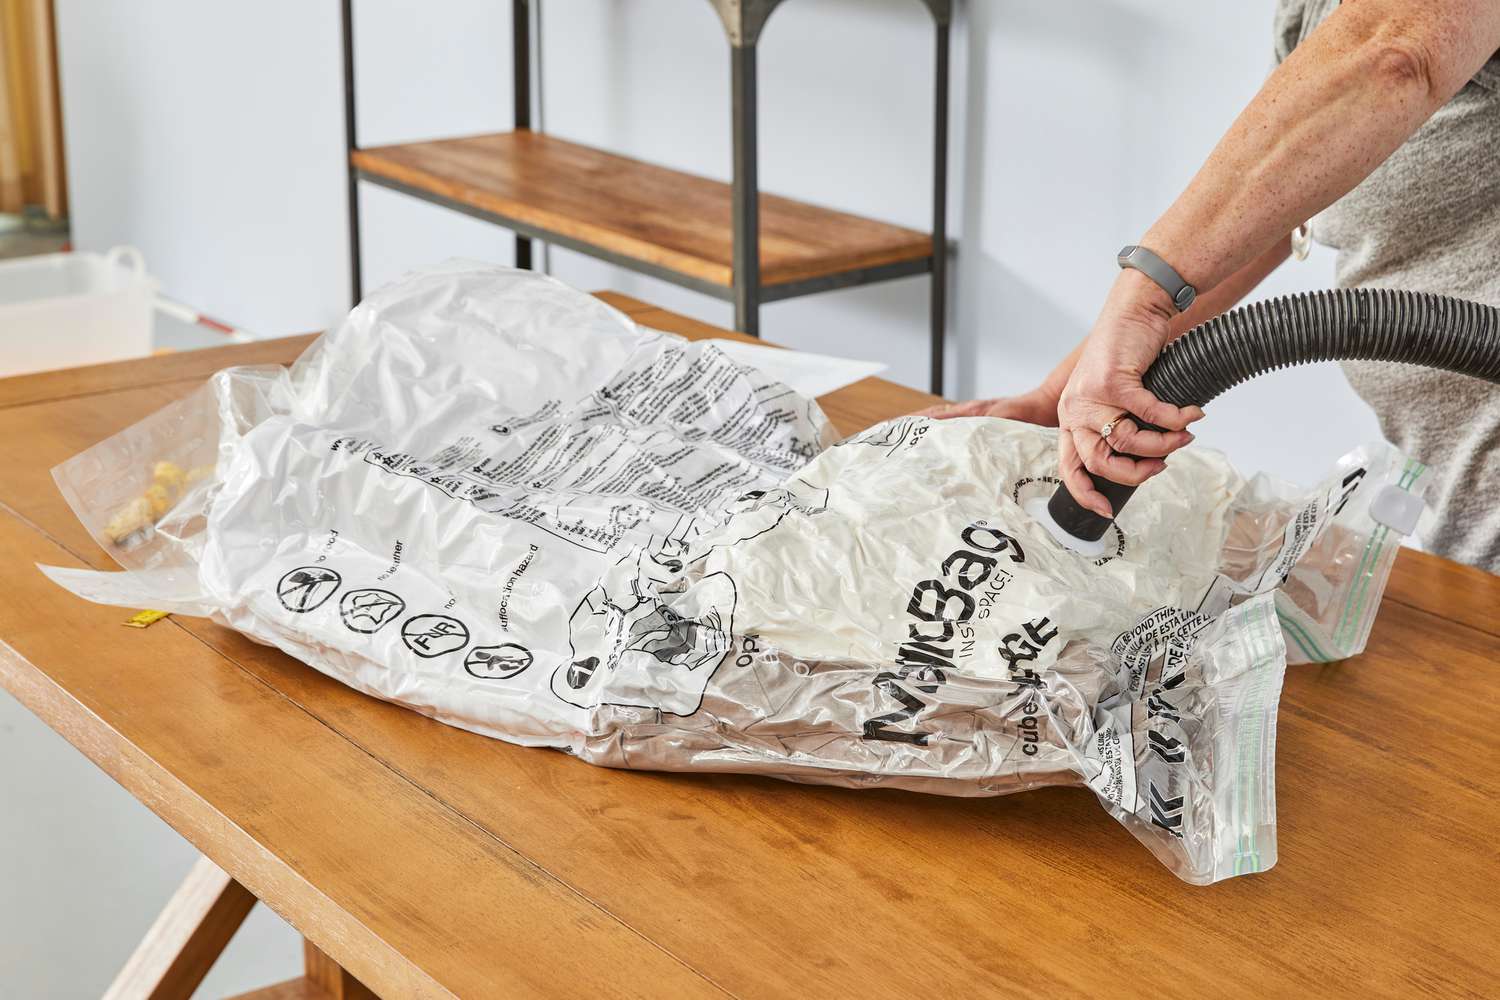 what-is-the-largest-vacuum-storage-bag-i-can-buy